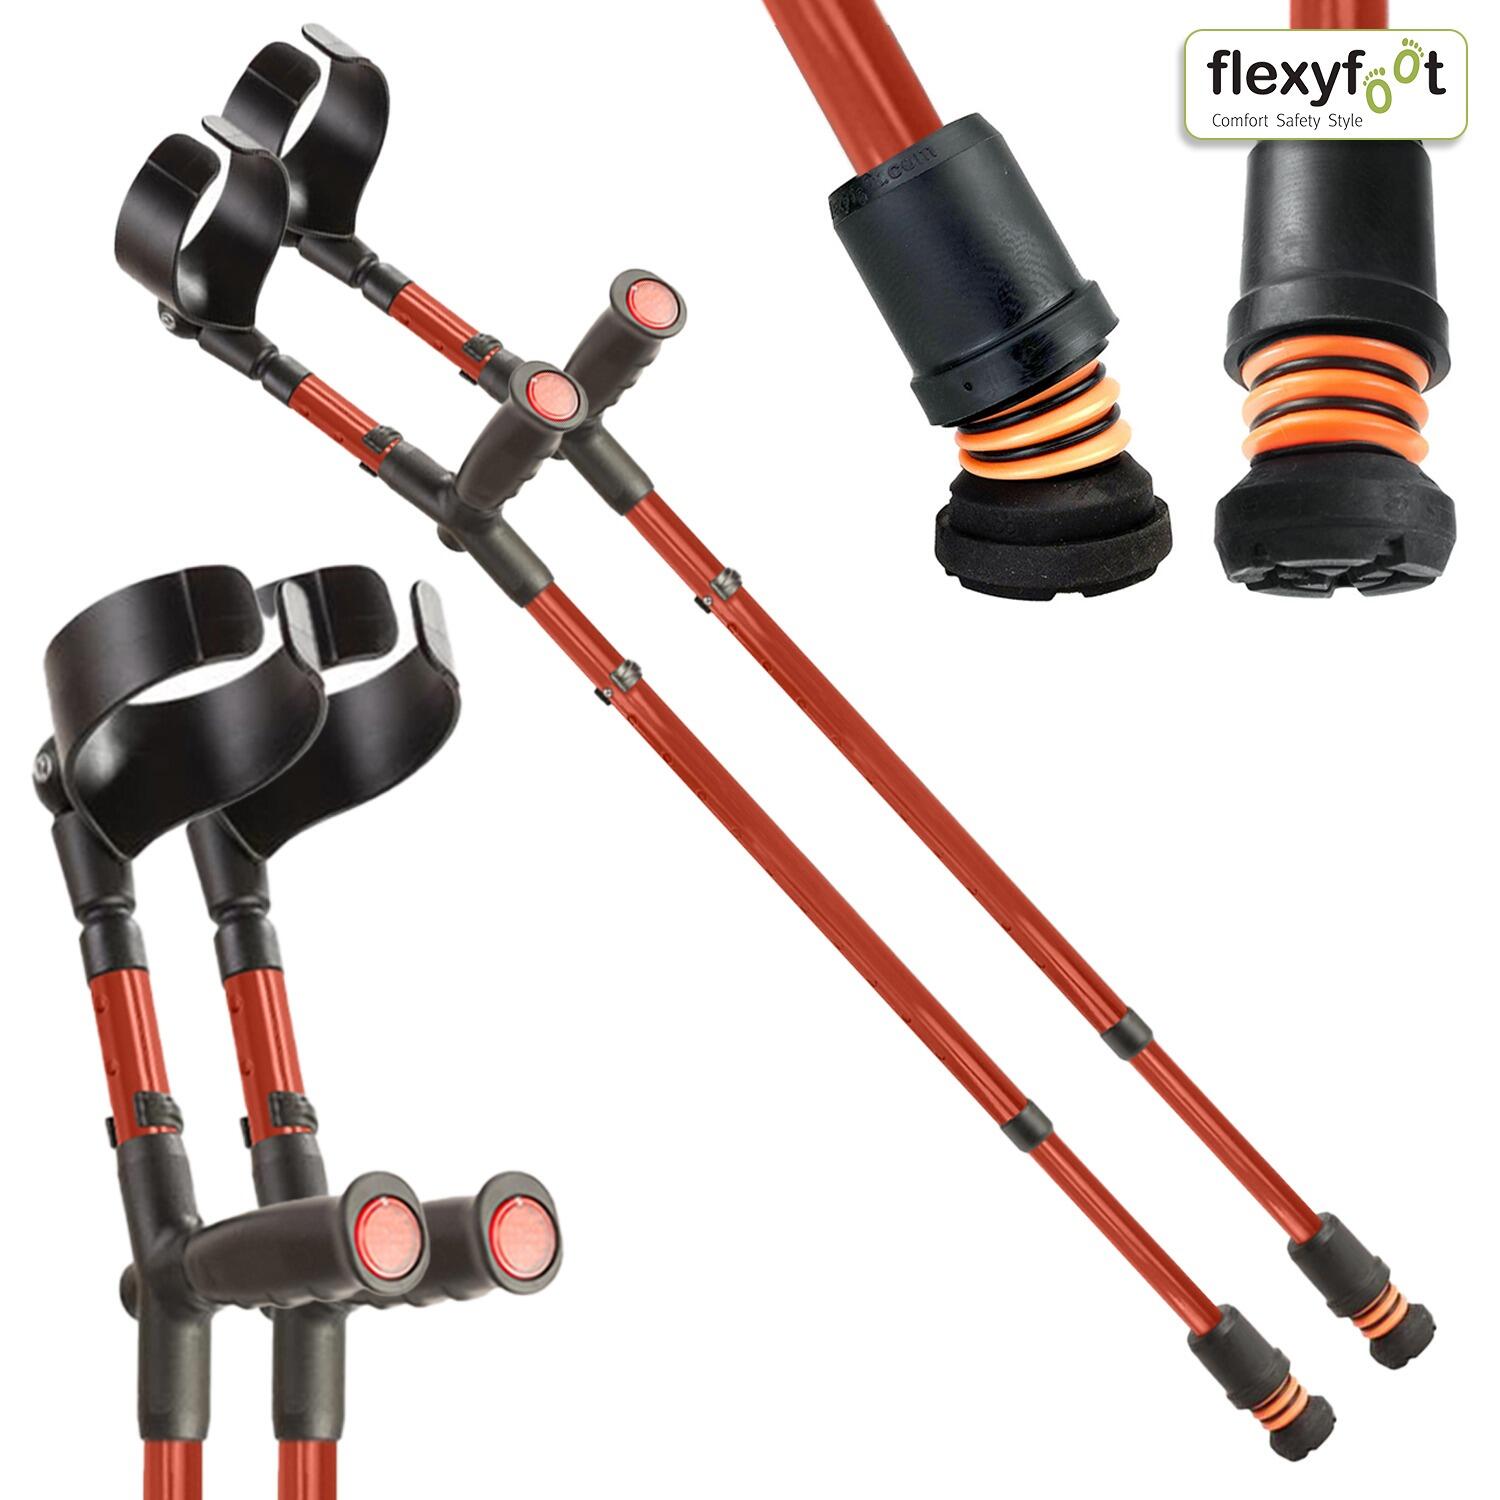 A pair of red Flexyfoot Soft Grip Double Adjustable Crutches